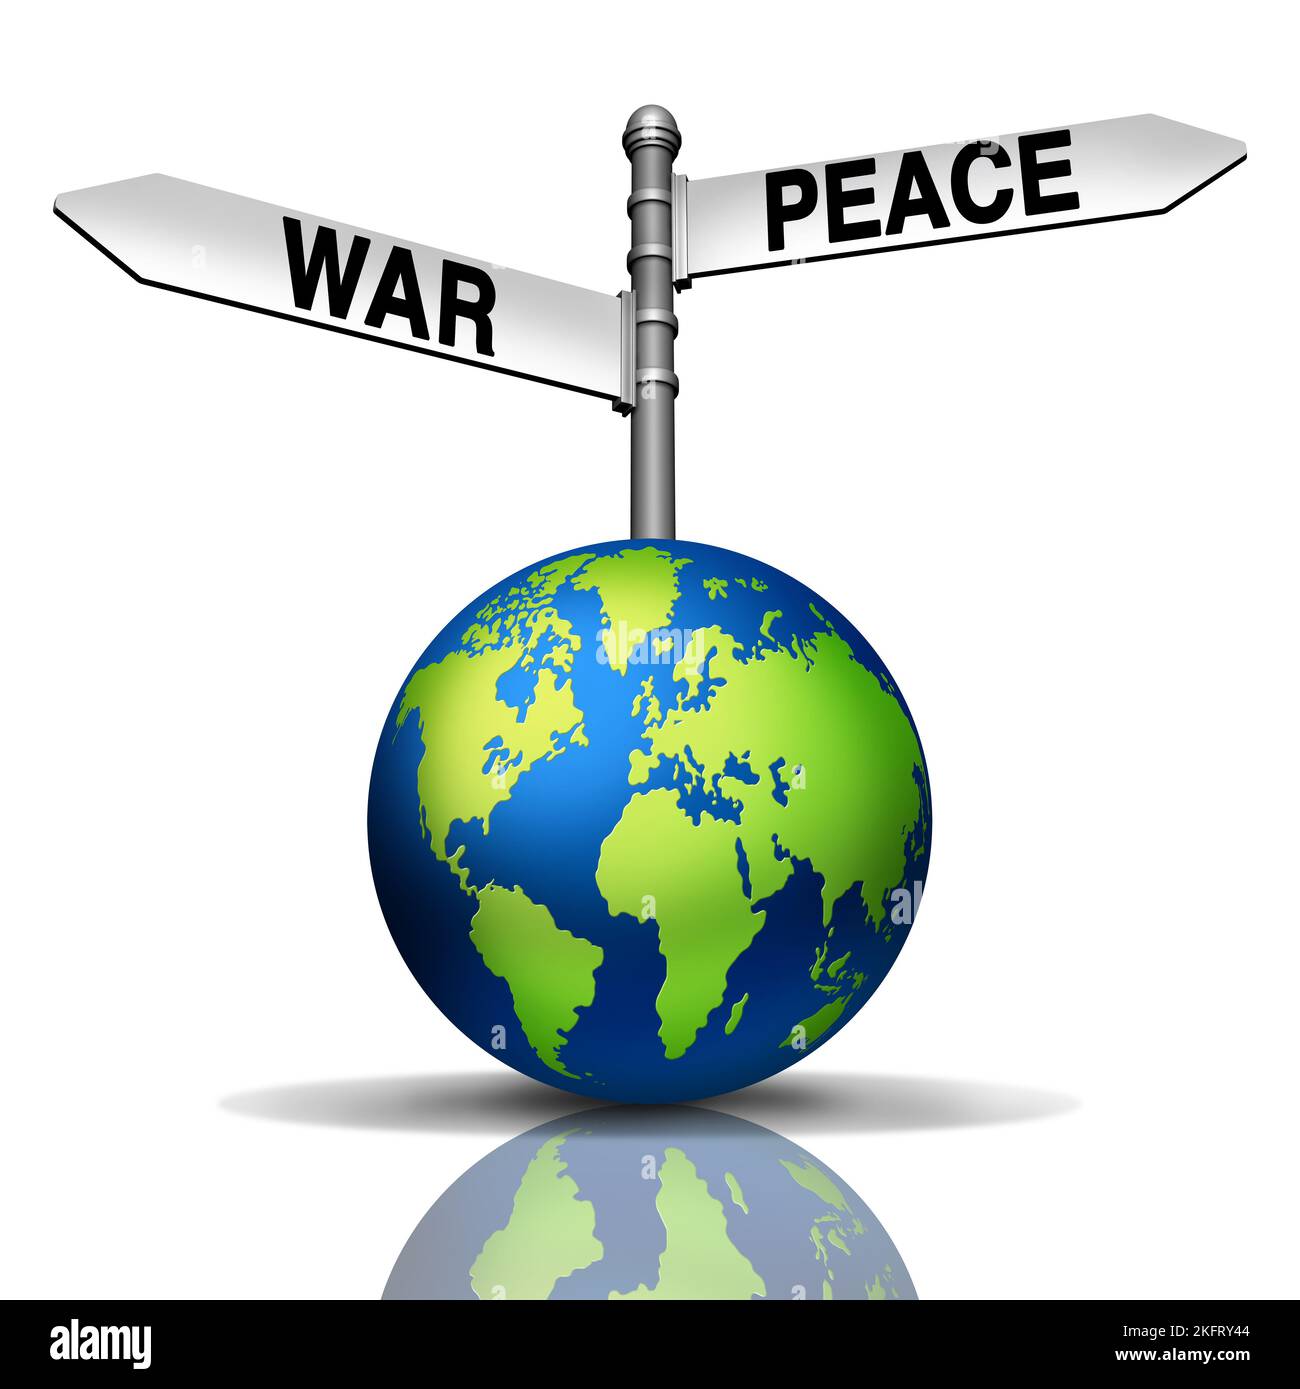 Global War Or Peace as conflict versus diplomacy with the world and street signs going in different geopolitical directions as a metaphor Stock Photo